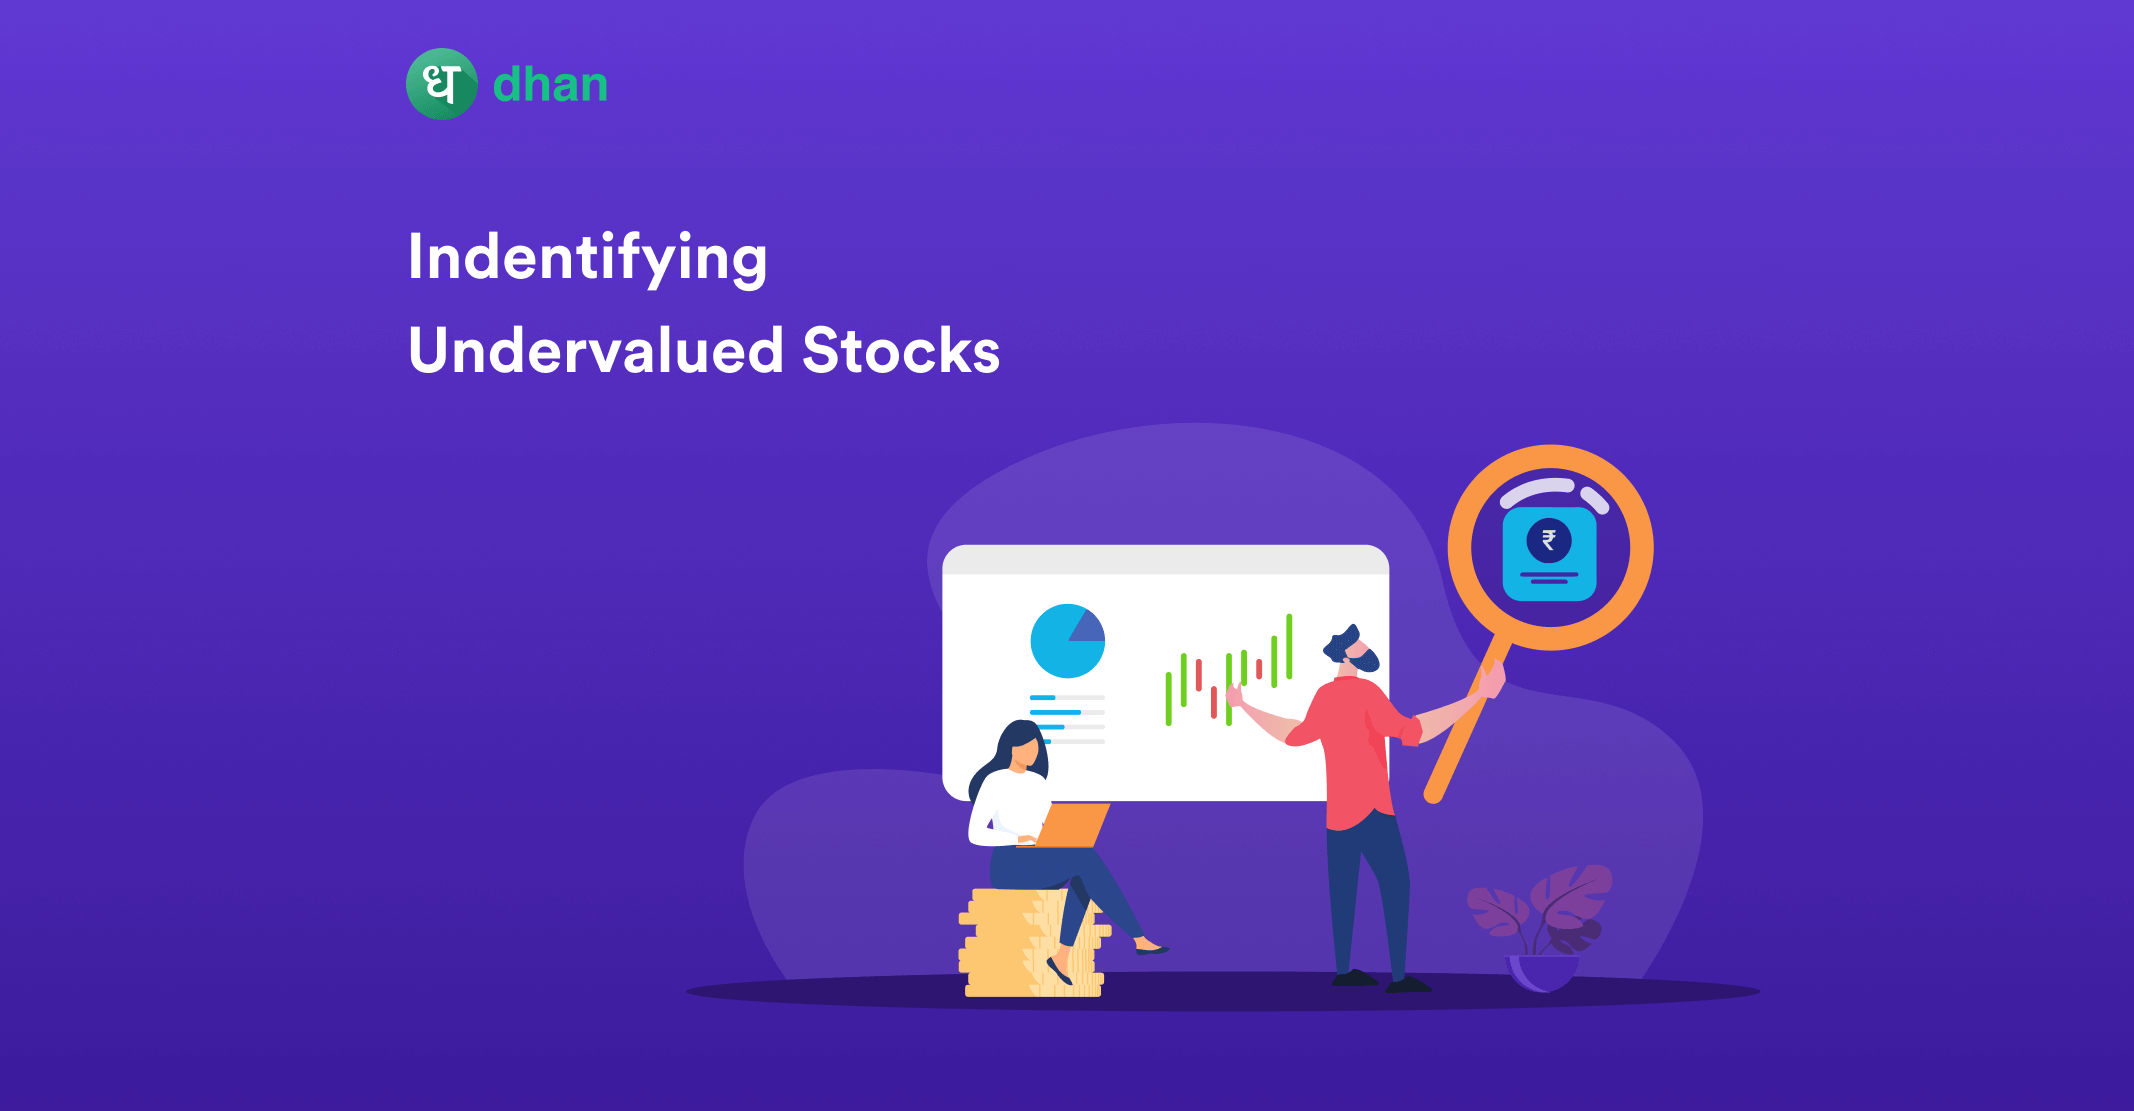 How to Identify Undervalued Stocks